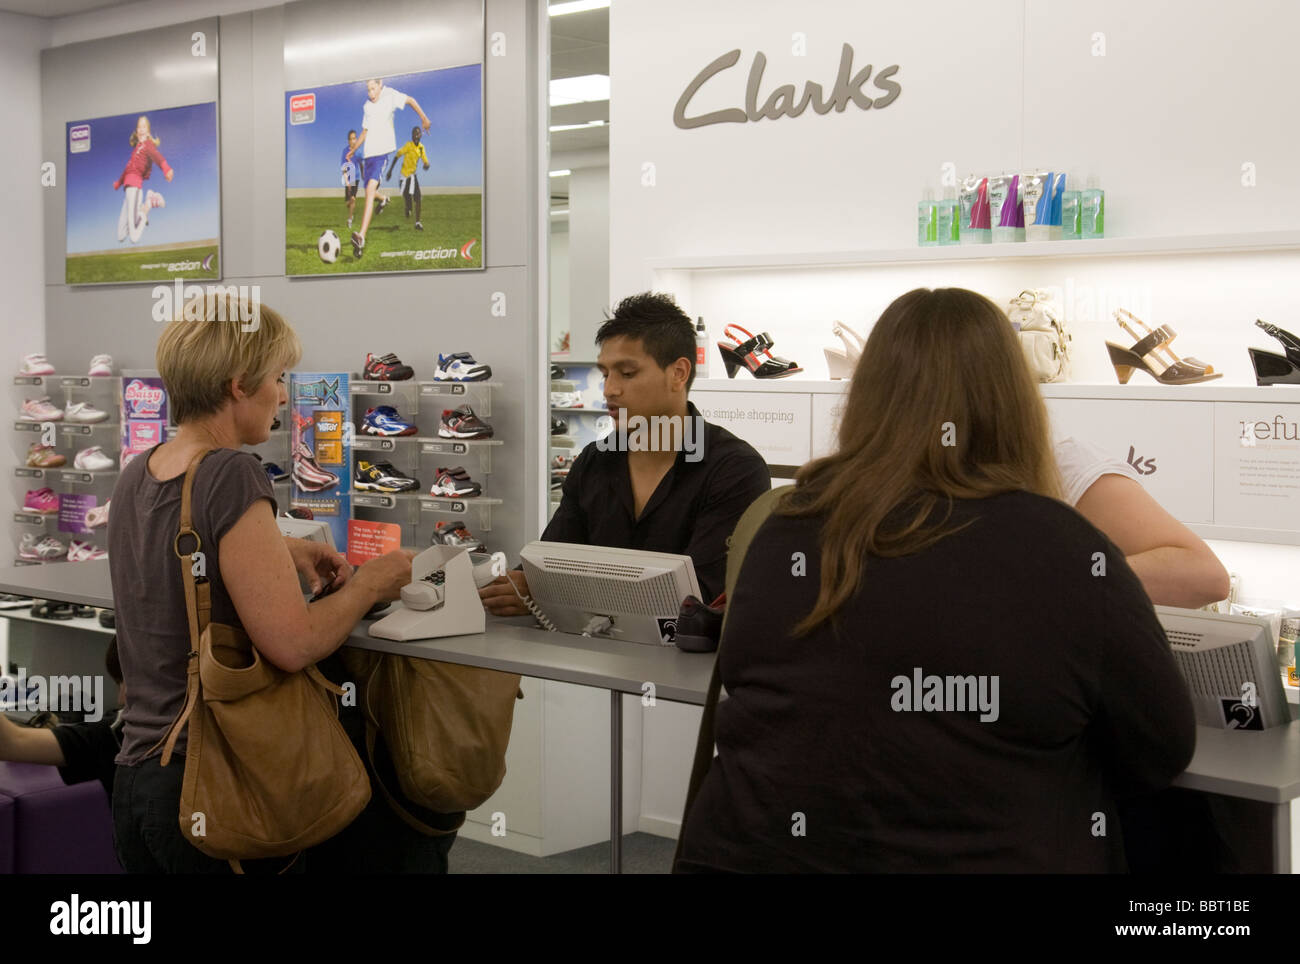 Clarks shoe hi-res stock photography and images - Alamy